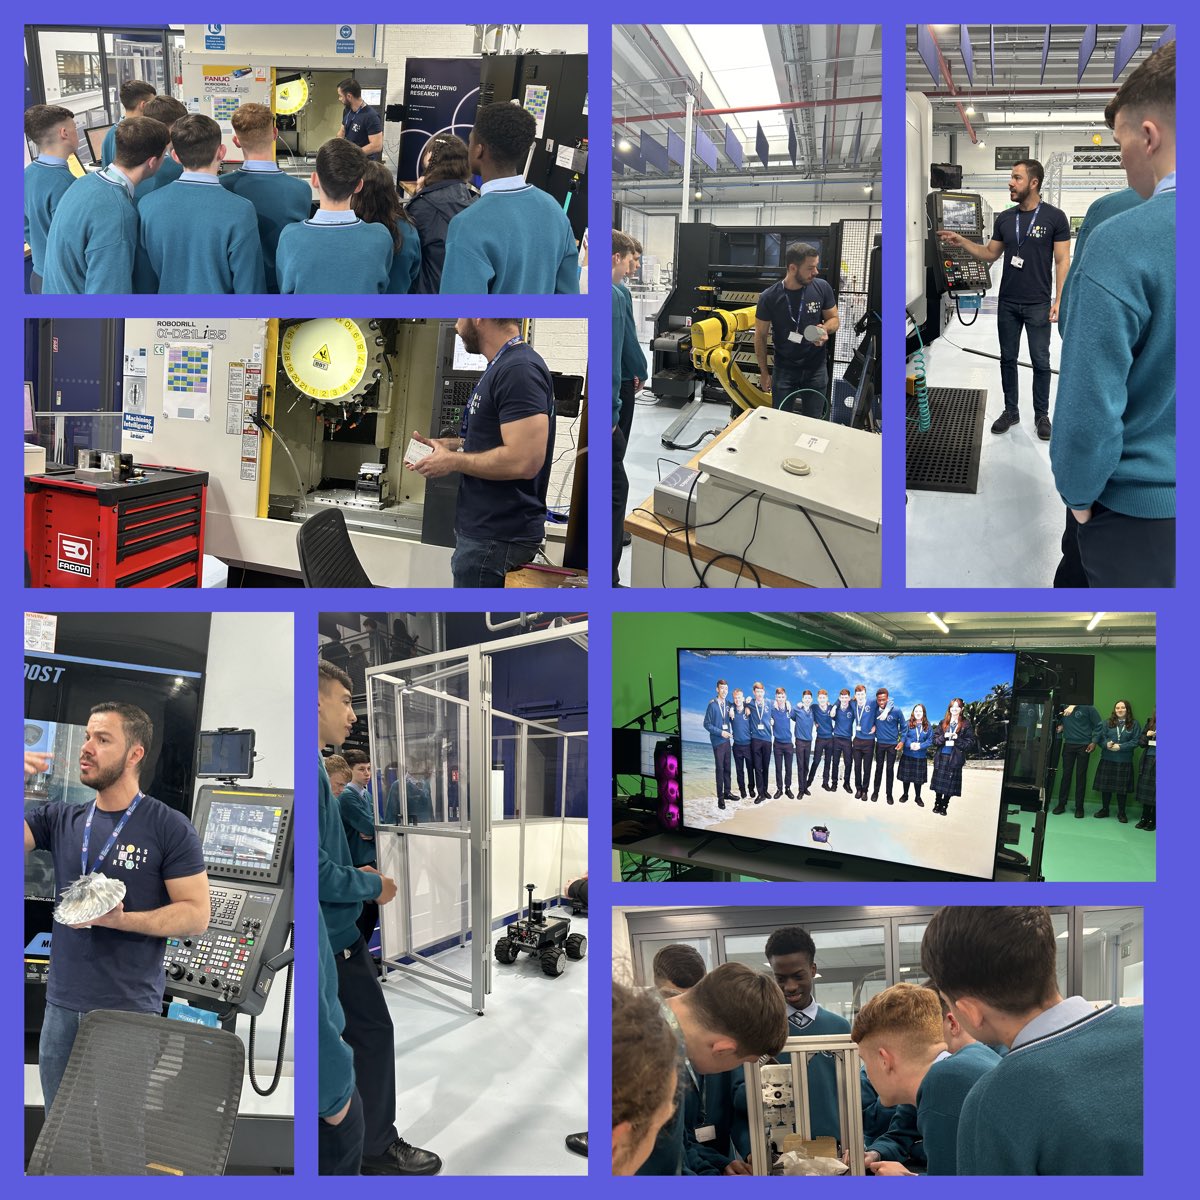 Big thank you to the staff in @IMR_ie for showing our TYs around their facility in Mullingar today 🤩 #robotics #engineering #manufacturing #careersinstem